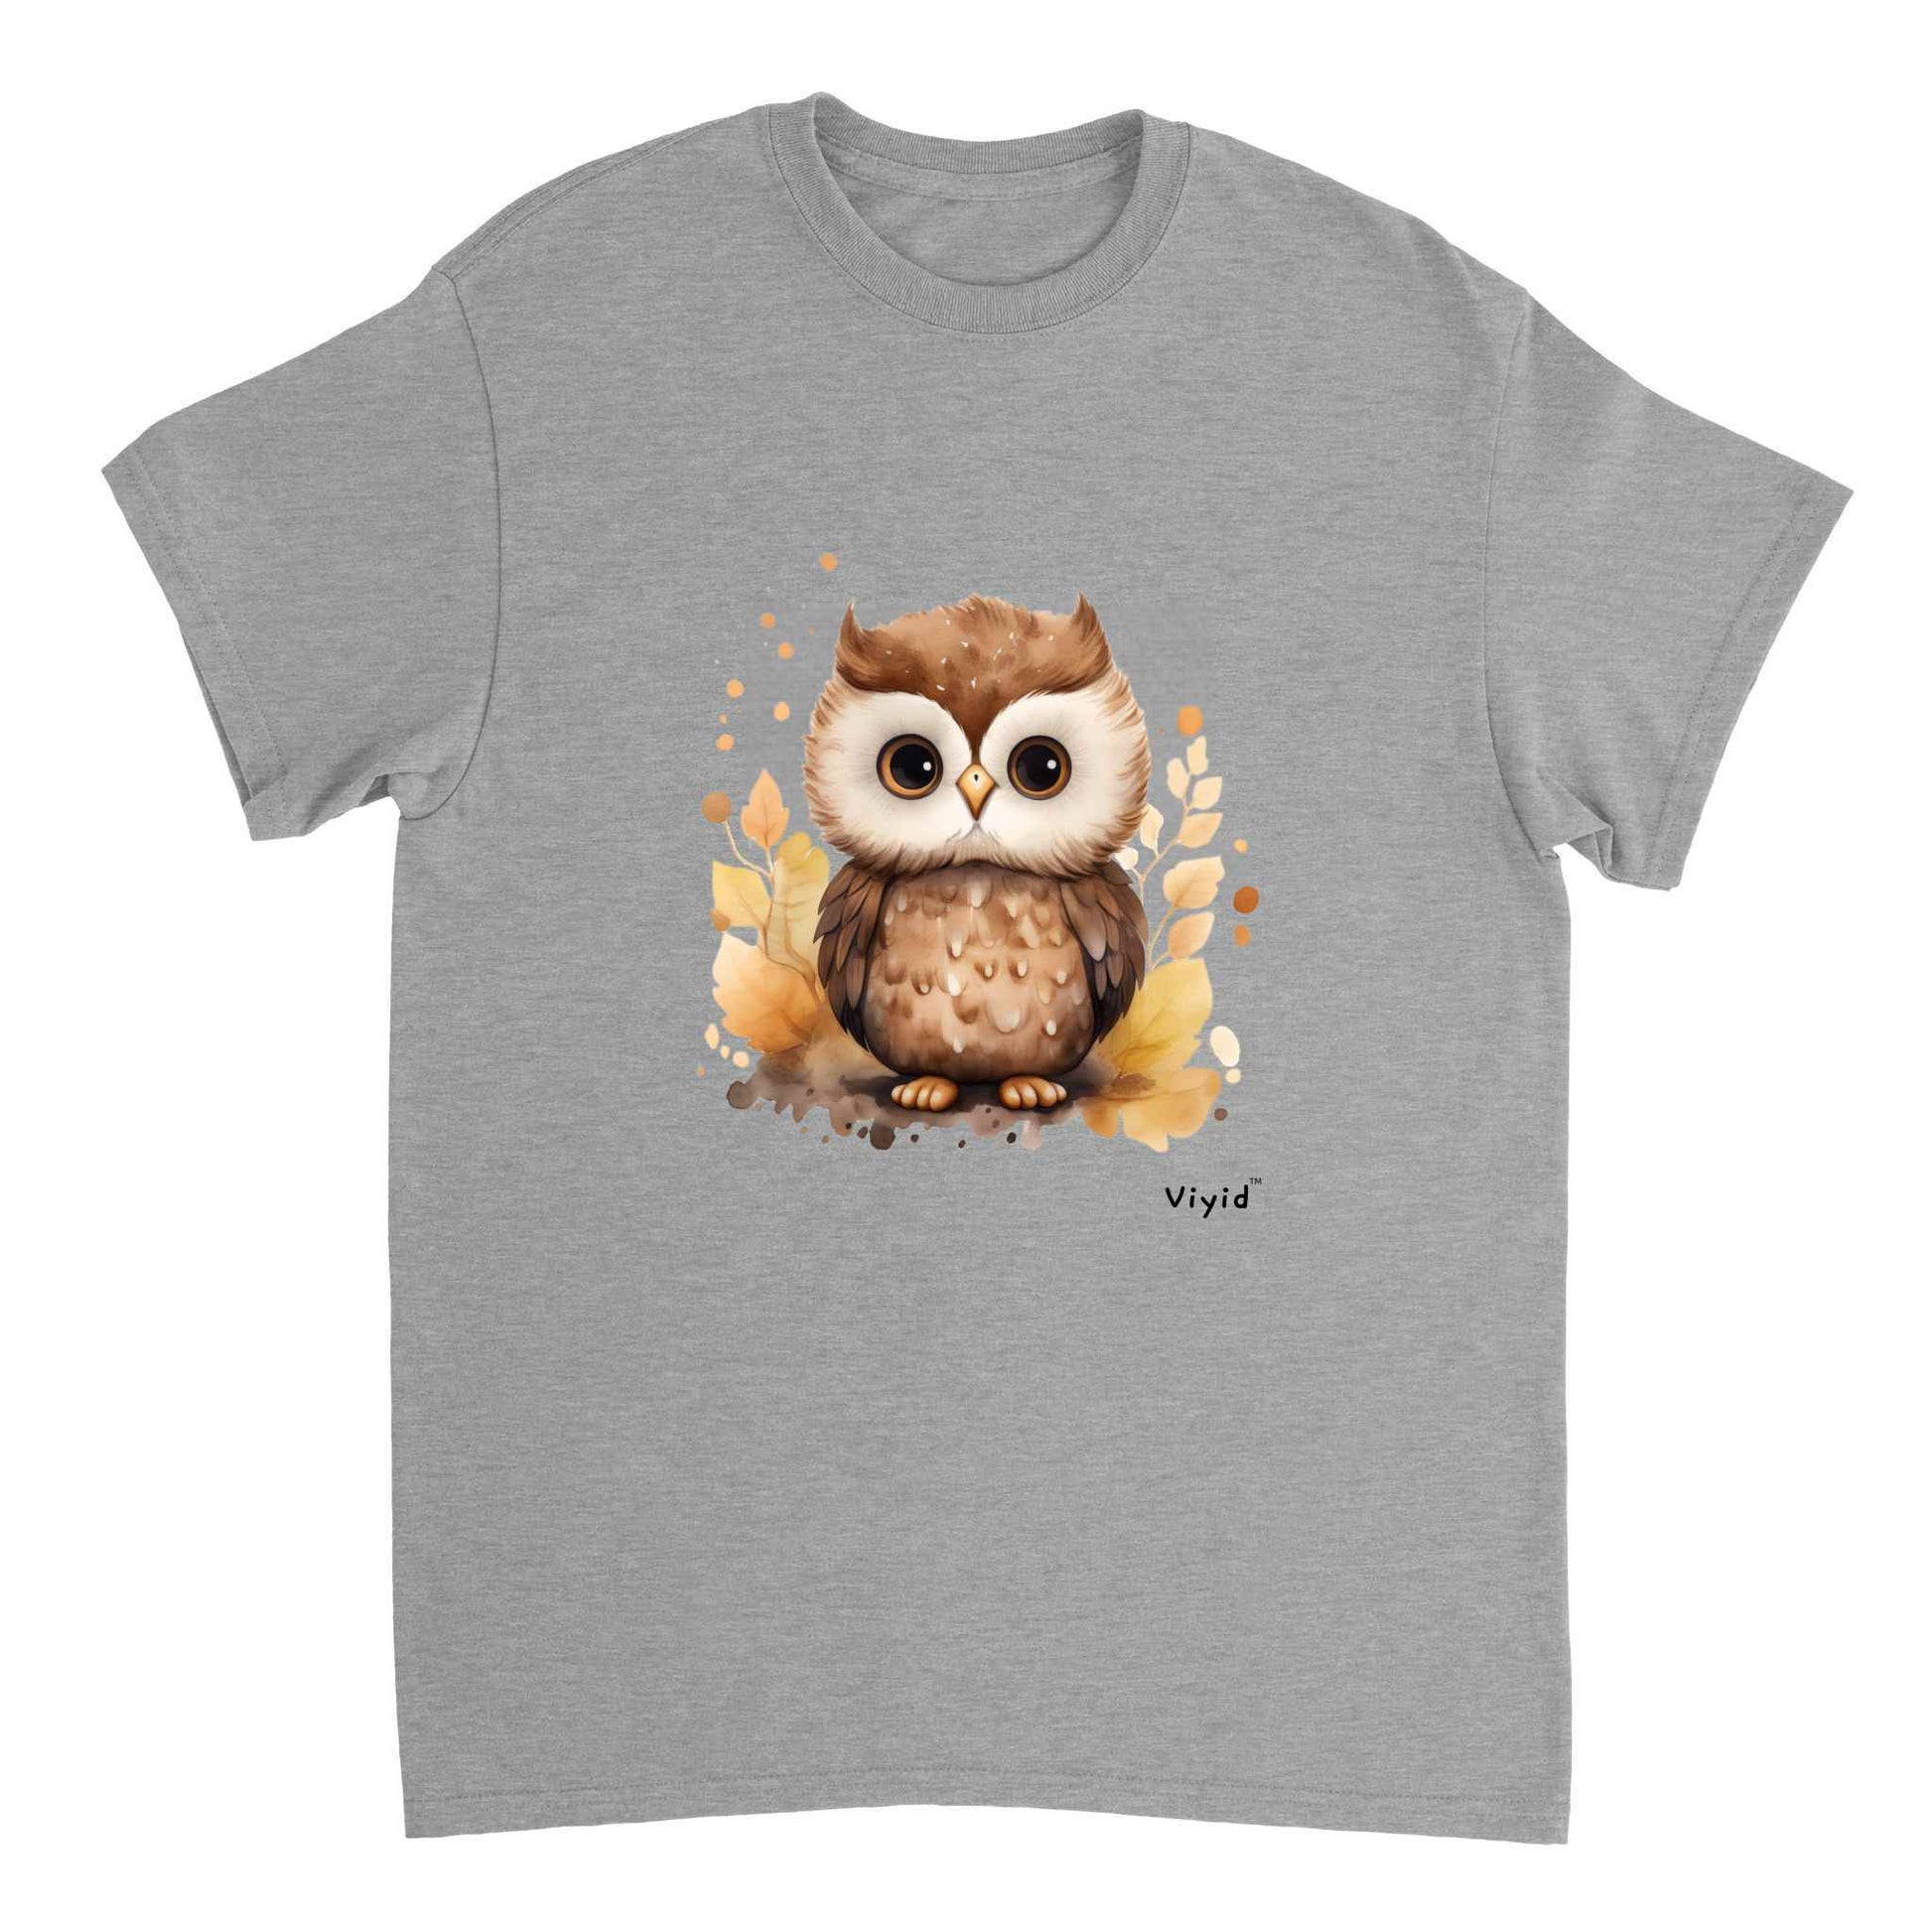 nocturnal owl youth t-shirt sports grey